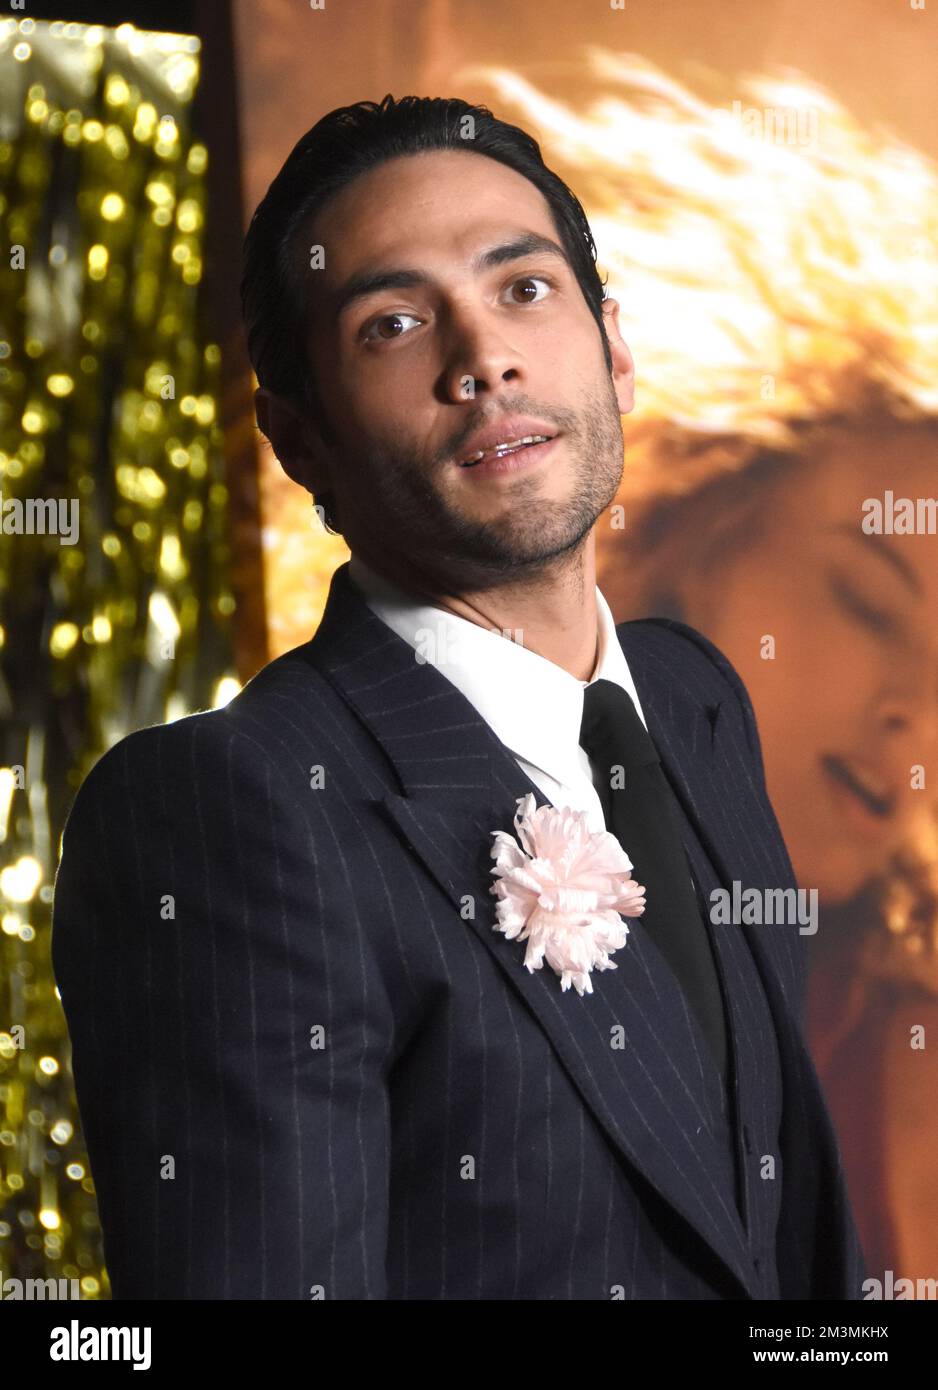 Los Angeles, California, USA 15th December 2022 Actor Diego Calva attends the Global Premiere Screening of 'Babylon' at Academy Museum of Motion Pictures on December 15, 2022 in Los Angeles, California, USA. Photo by Barry King/Alamy Live News Stock Photo